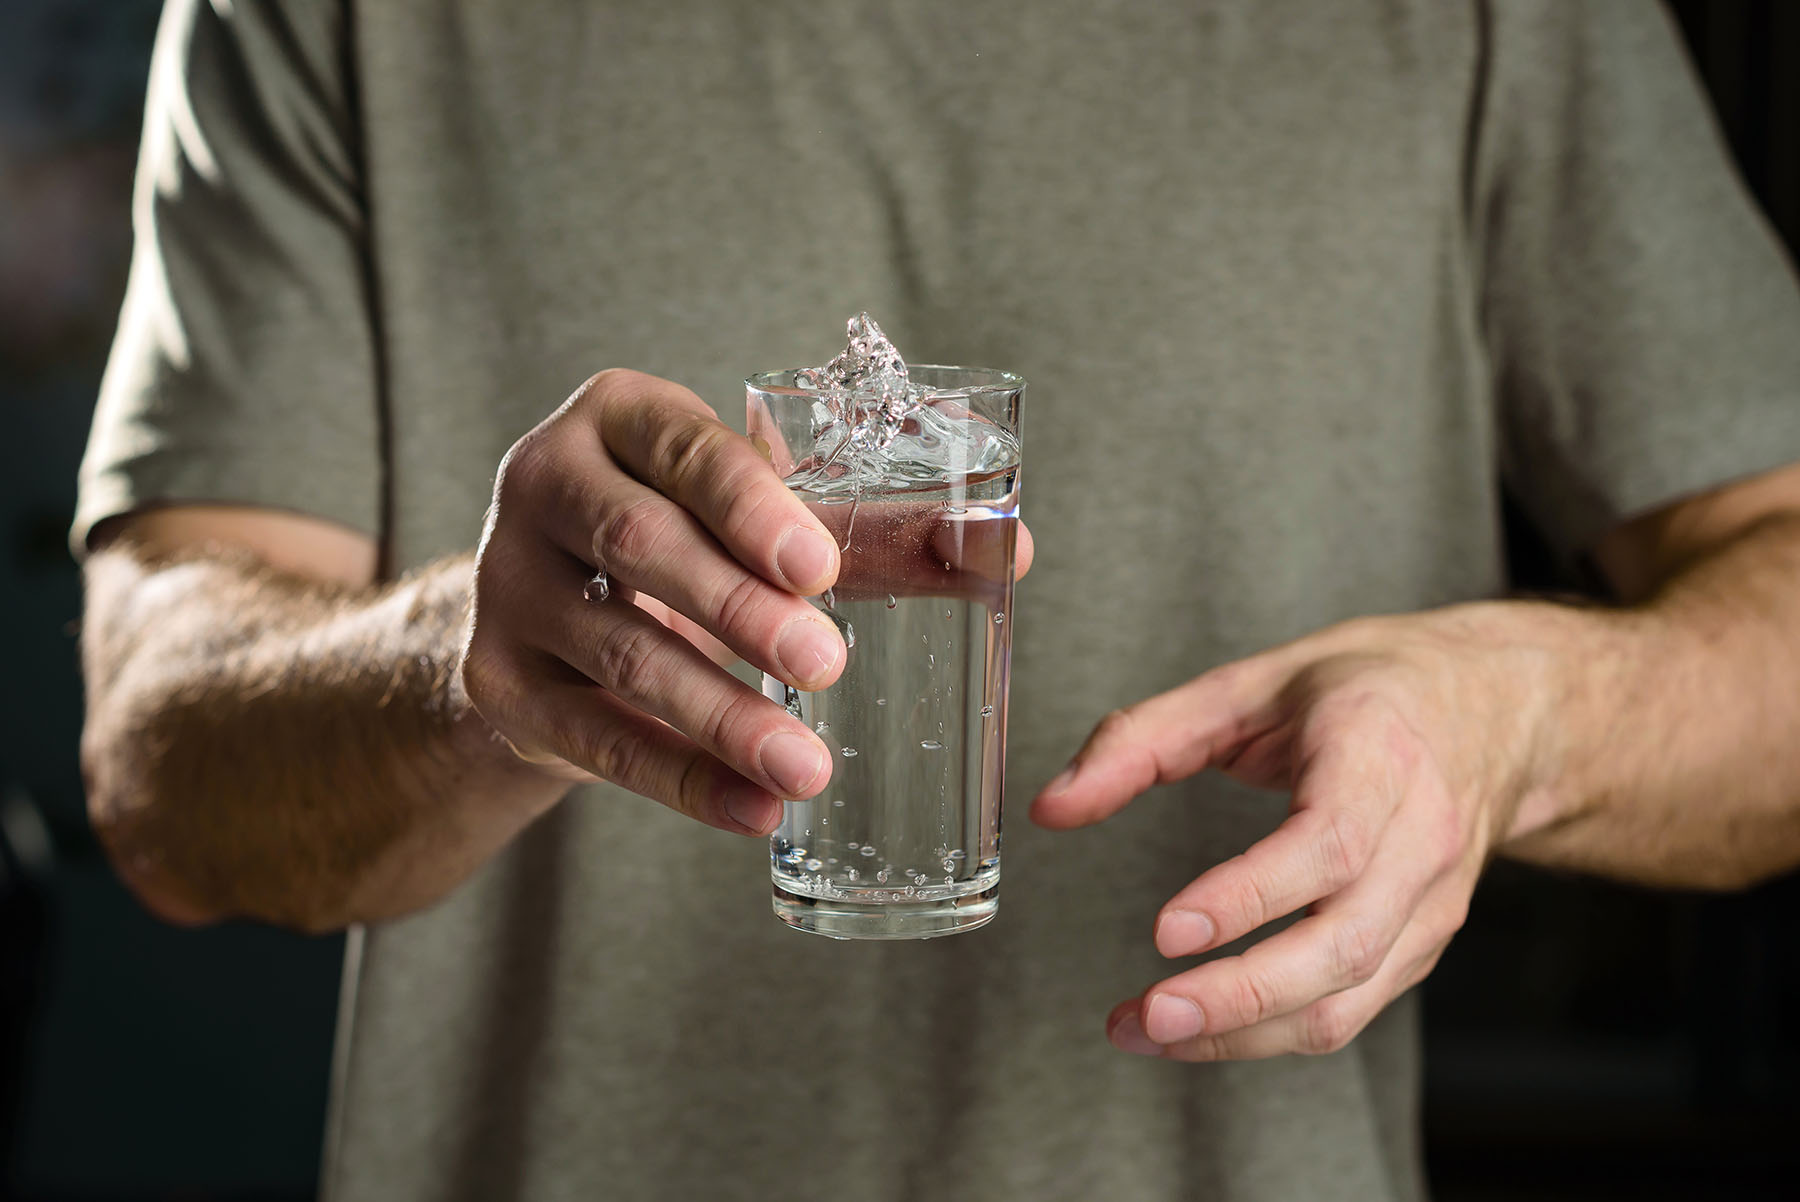 Close up of a man's hands. He's holding a glass of water which shakes from his tremors.